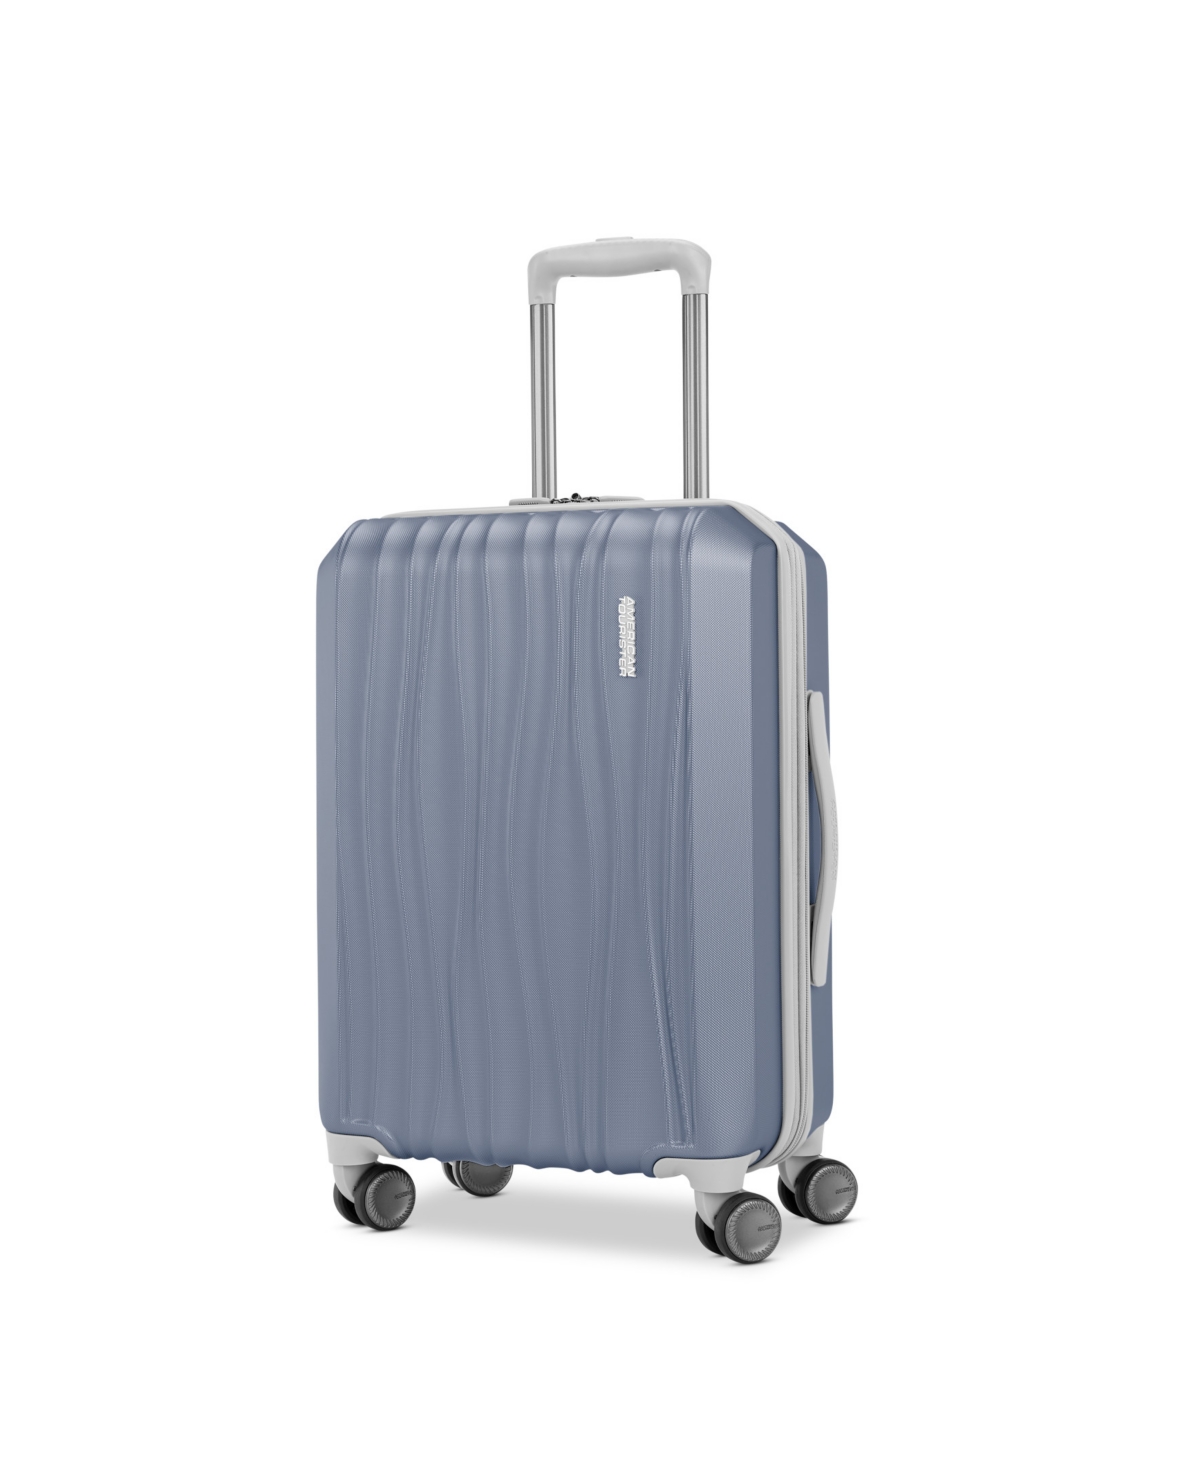 American Tourister Tribute Encore Hardside Carry On 20" Spinner Luggage In Slate Blue